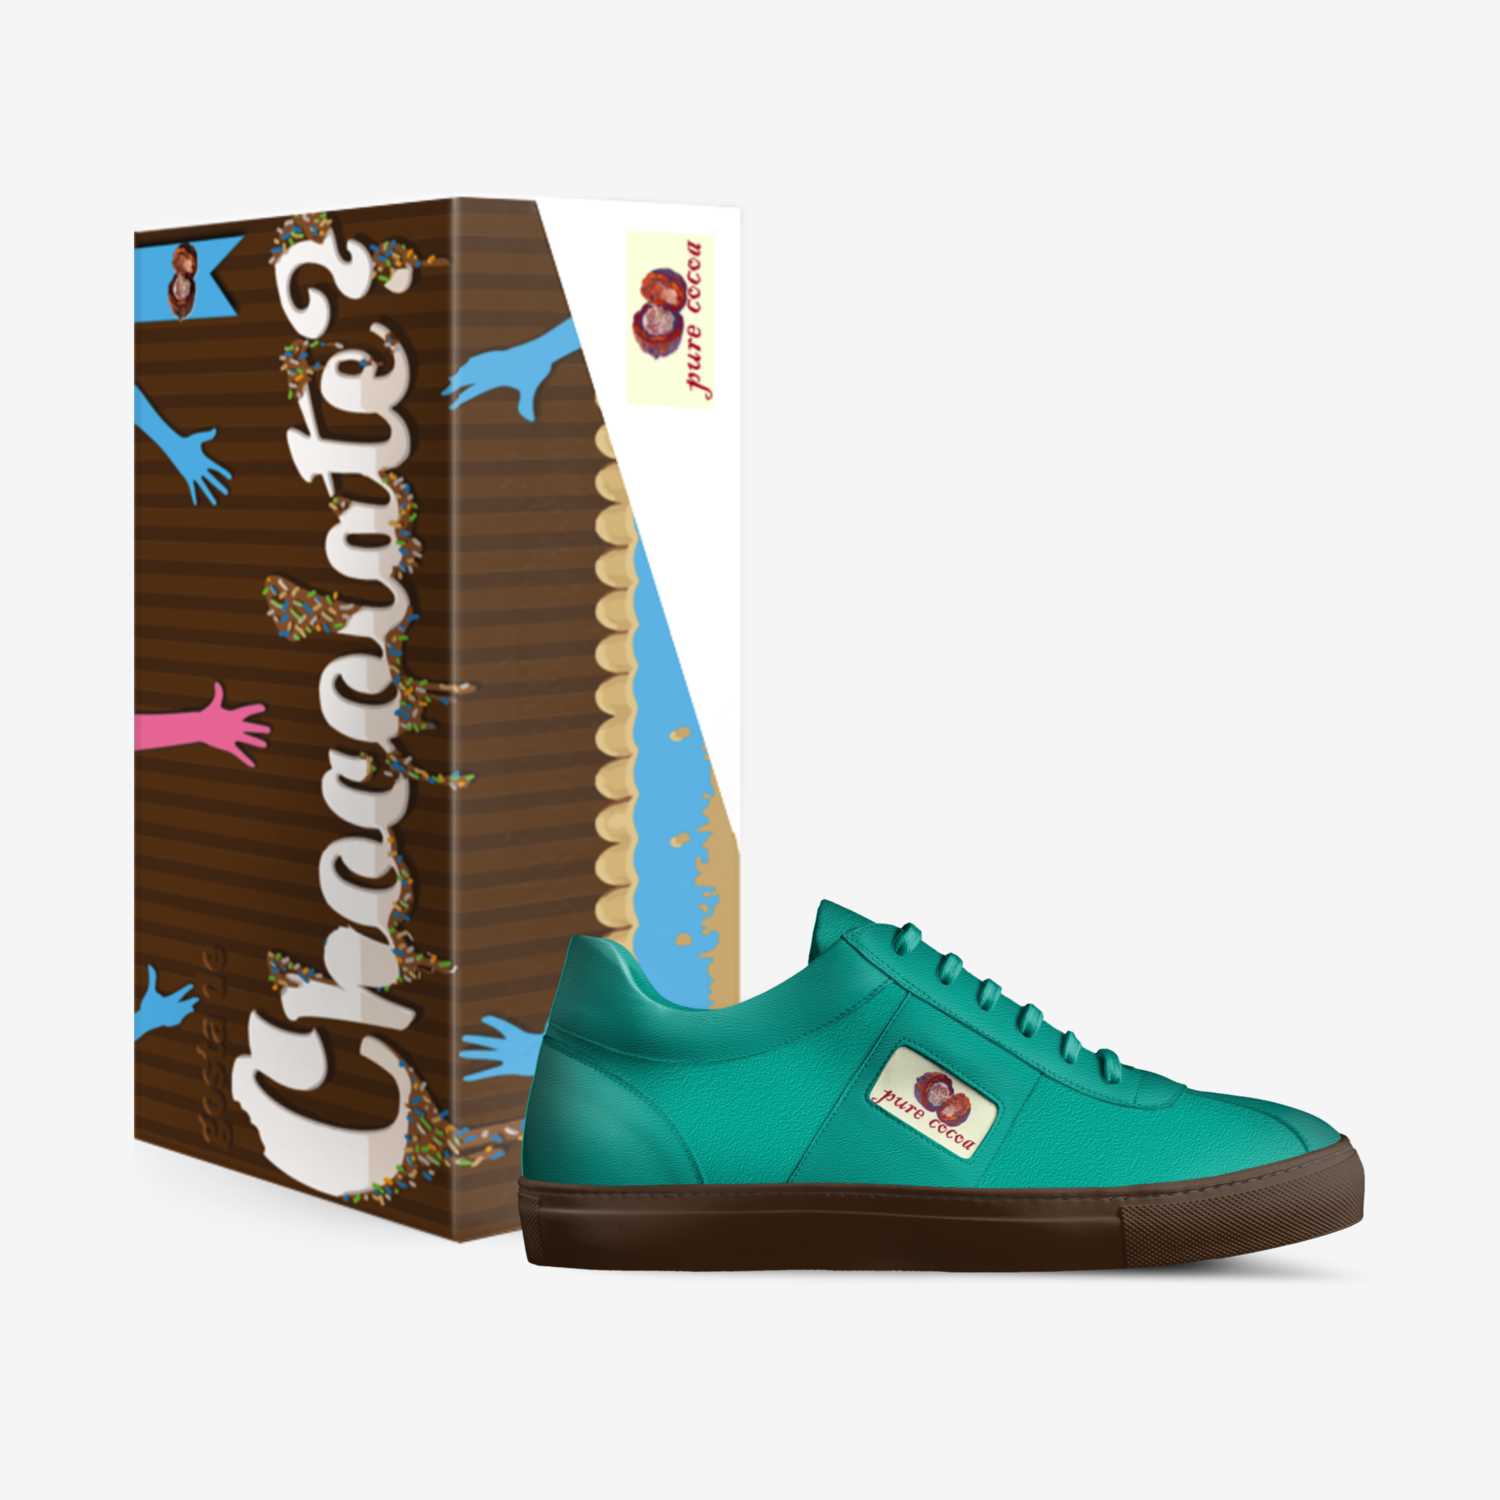 Pure Cocoa custom made in Italy shoes by Erika Lopera | Box view